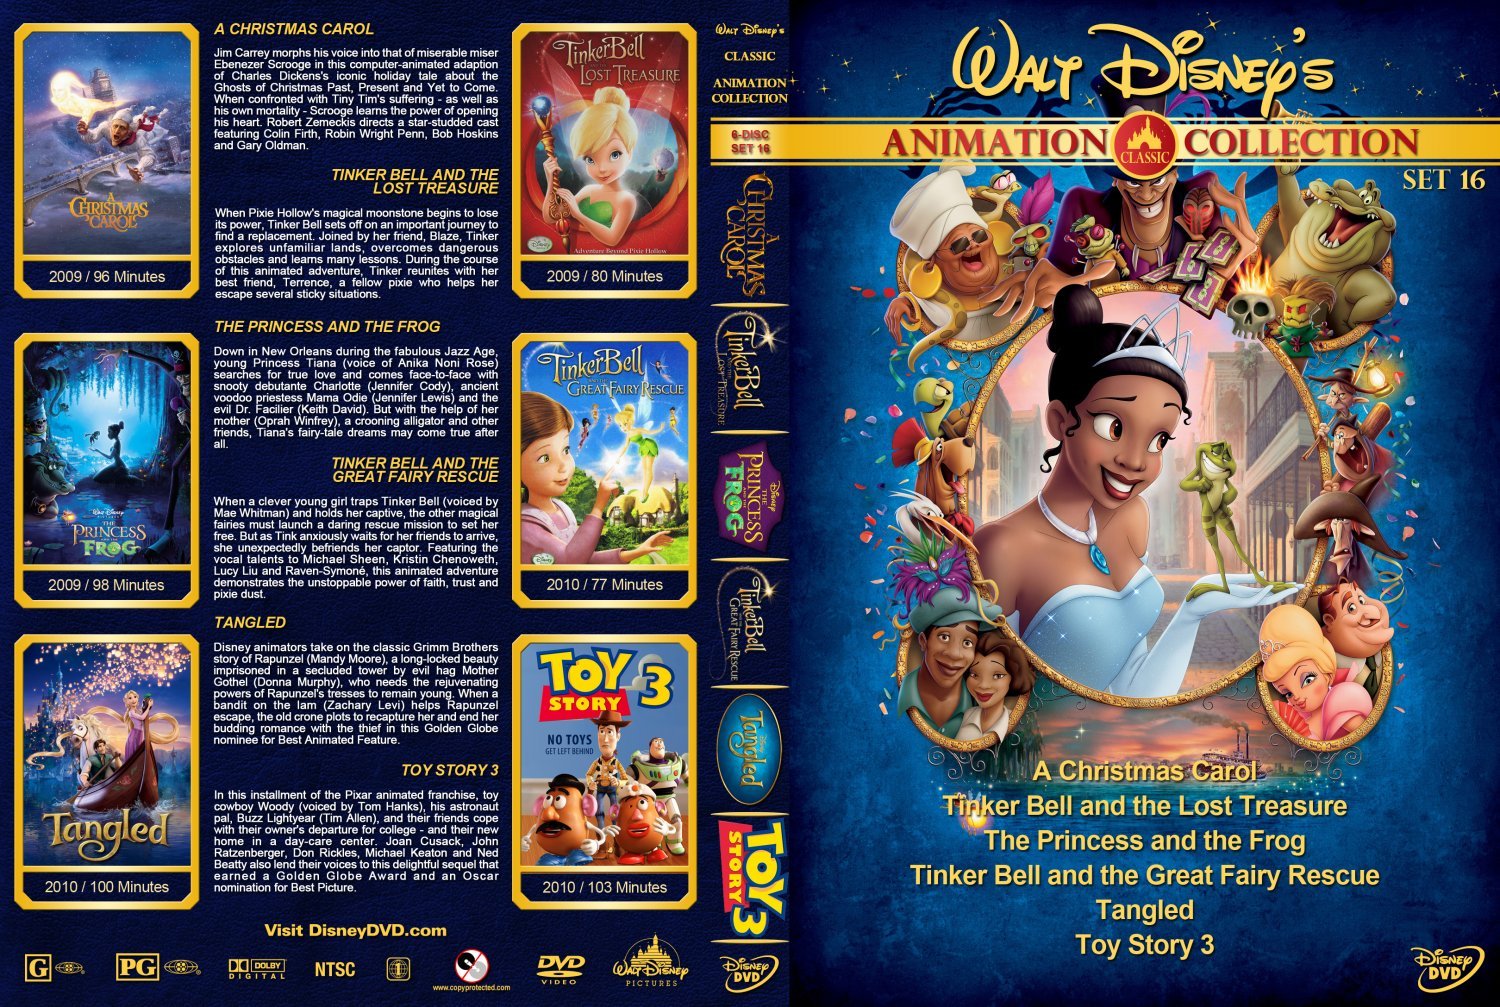 Walt Disney’s Classic Animation Collection Set 16 Dvd Covers And Labels